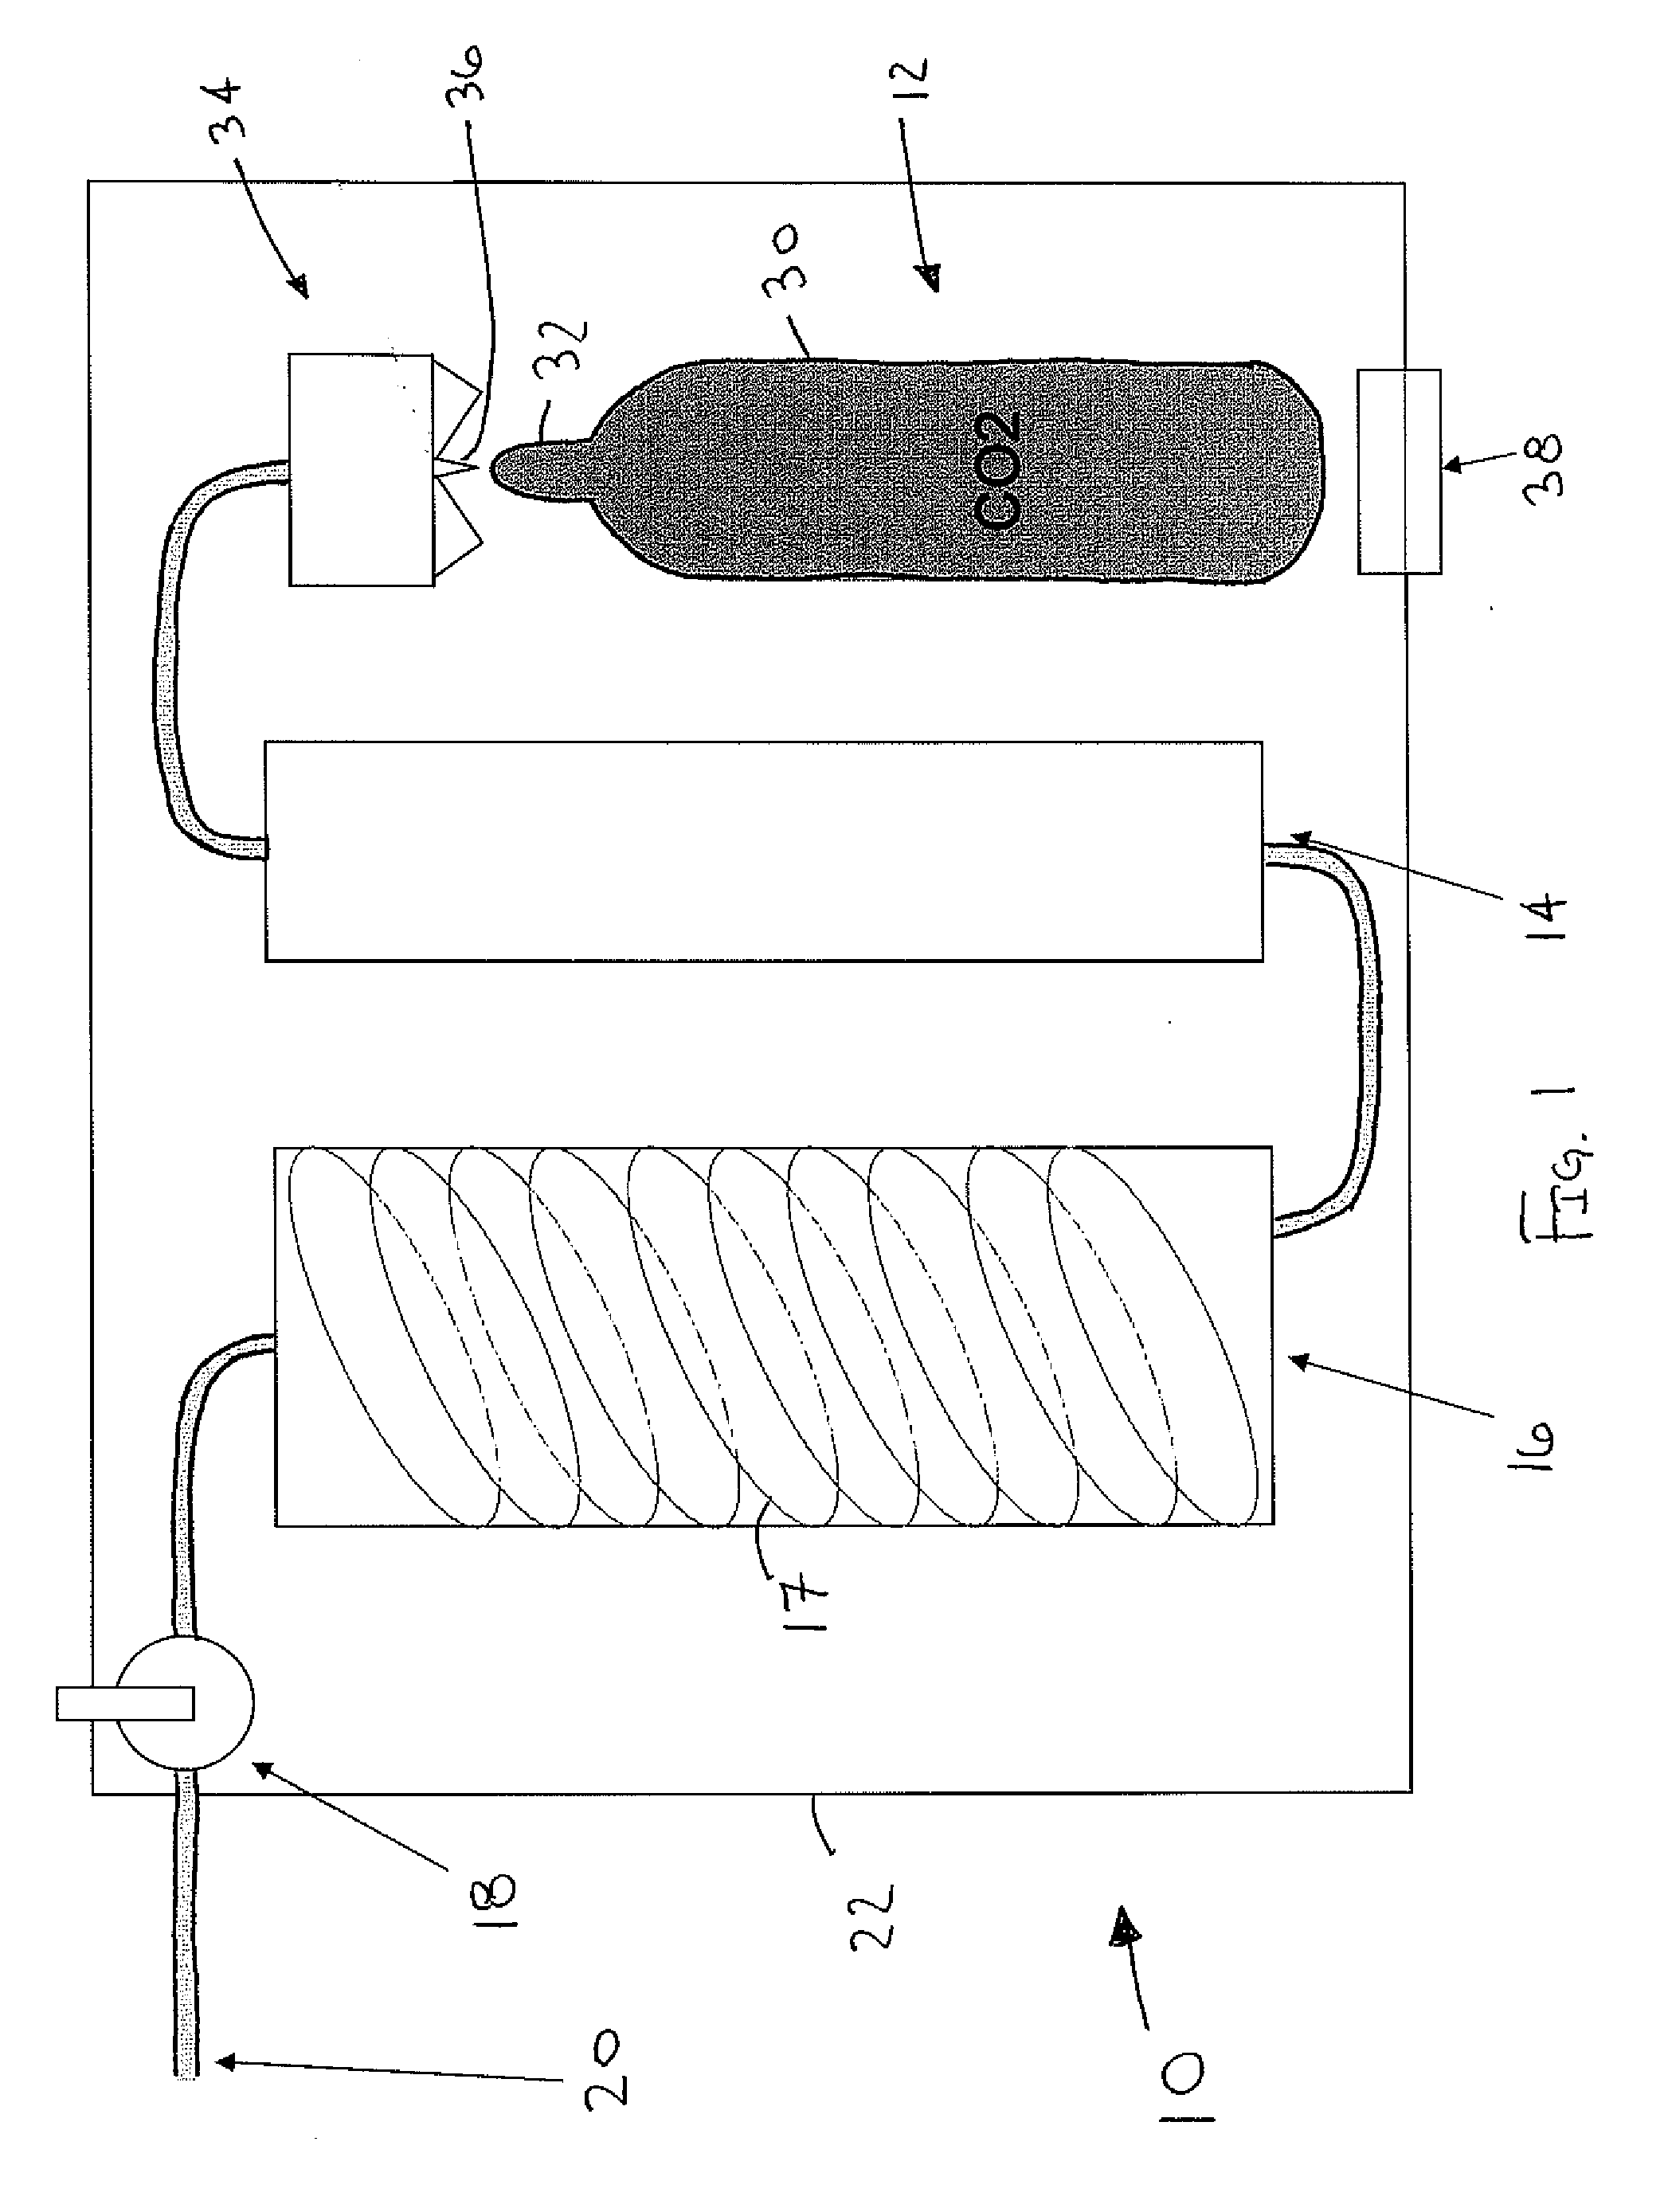 Apparatus and methods for flushing medical devices